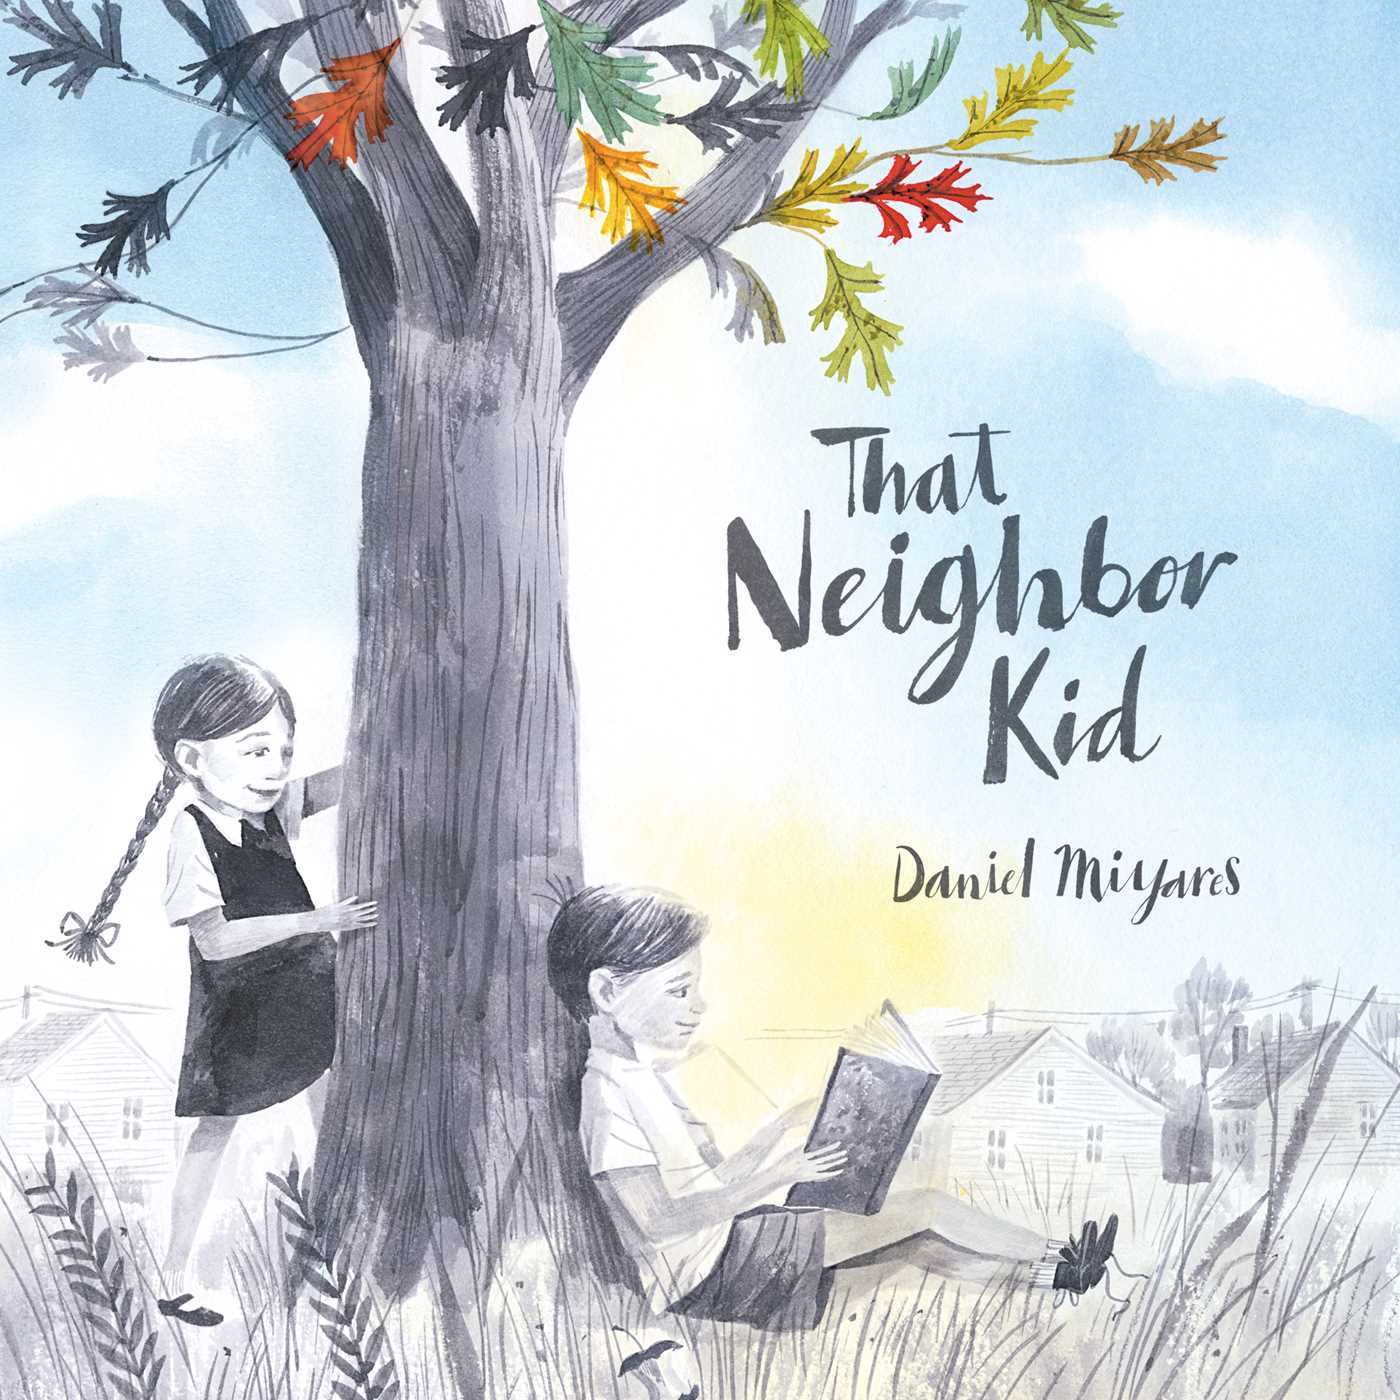 Image of the cover of the book That Neighbor Kid by Daniel Miyares